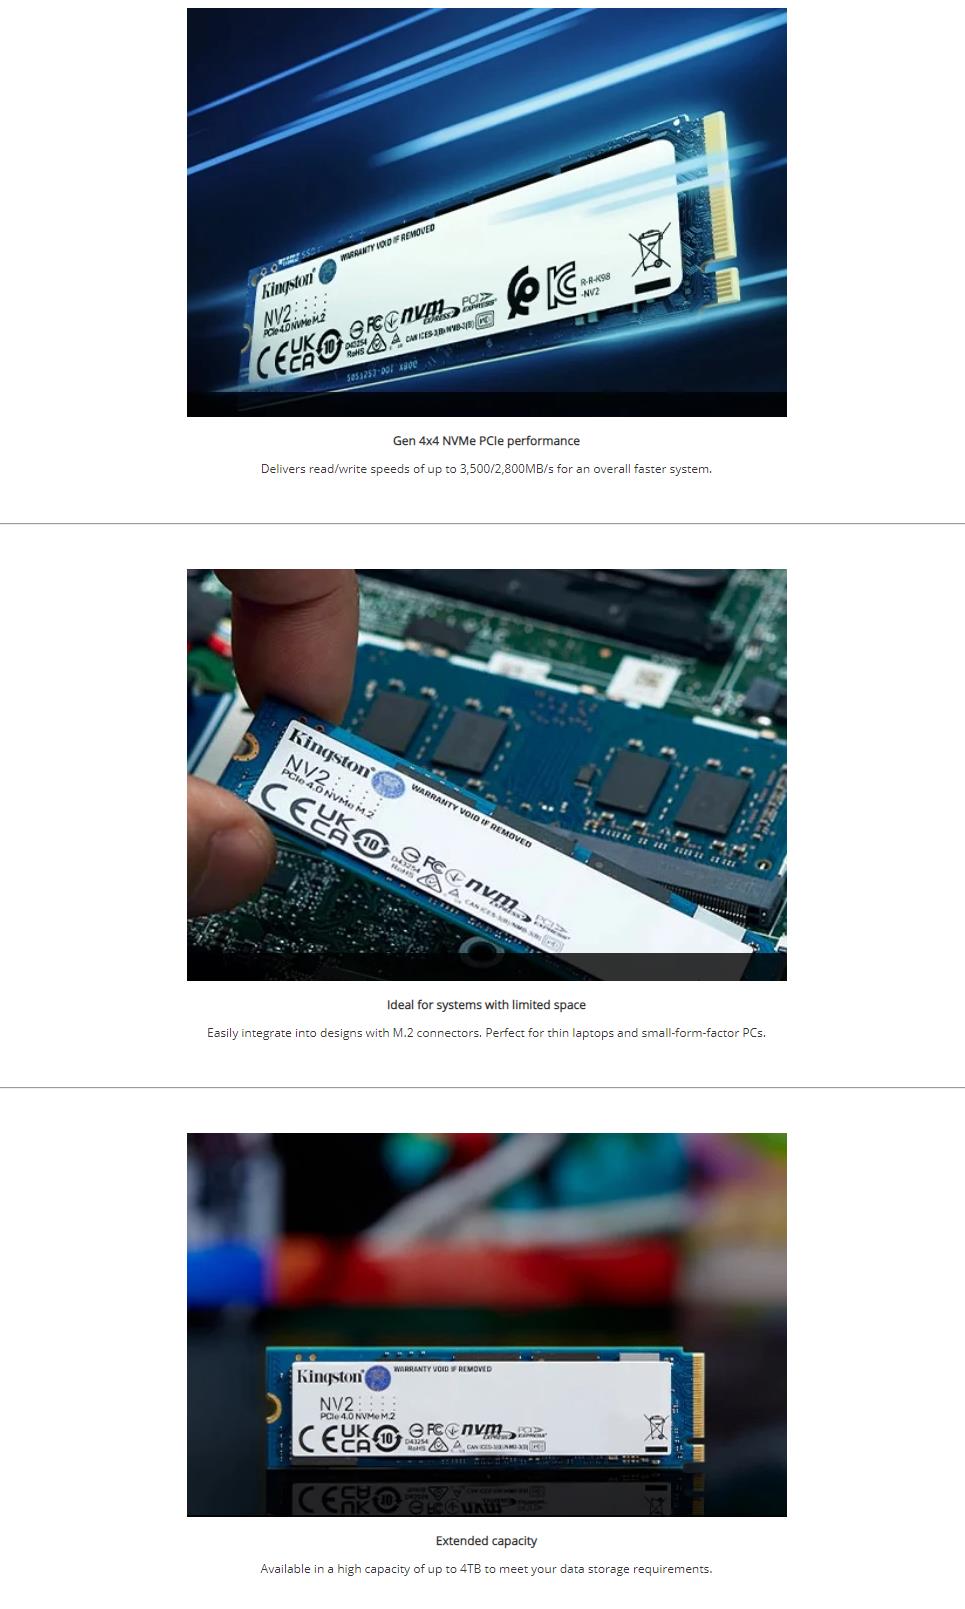 A large marketing image providing additional information about the product Kingston NV2 PCIe Gen4 NVMe M.2 SSD - 4TB - Additional alt info not provided